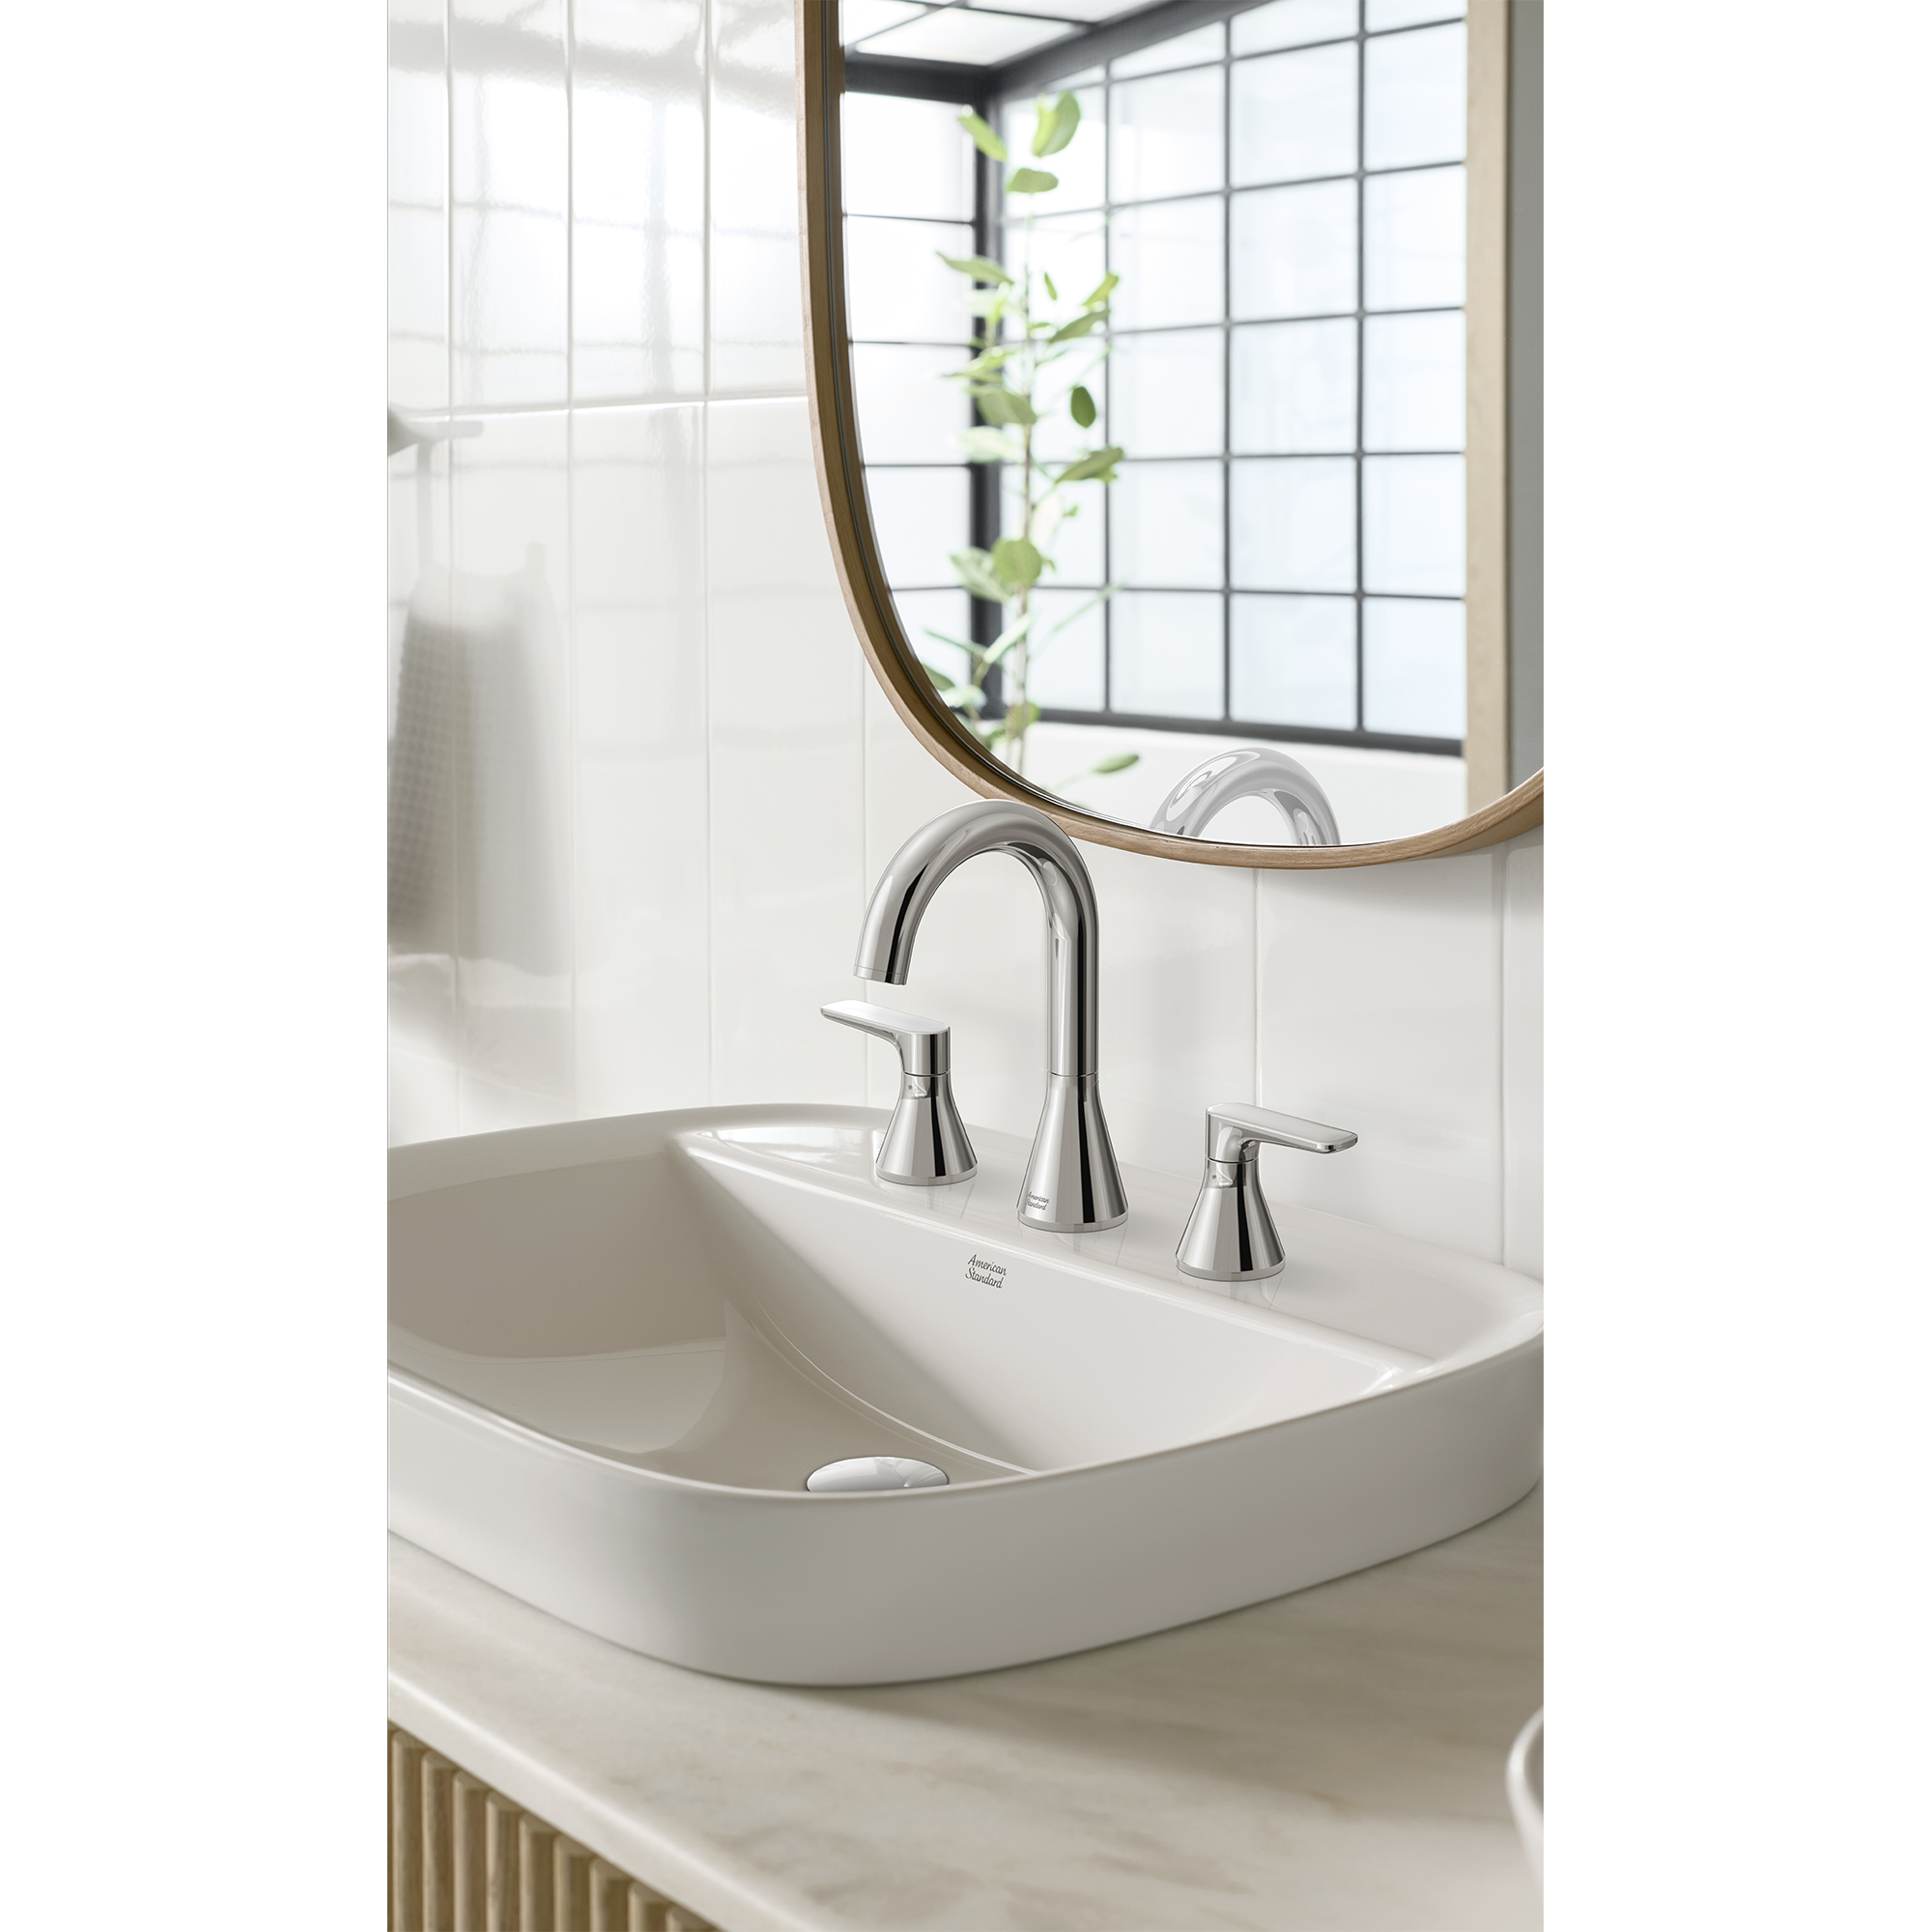 Aspirations™ 8-Inch Widespread 2-Handle Bathroom Faucet 1.2gpm/4.5 L/min With Lever Handles